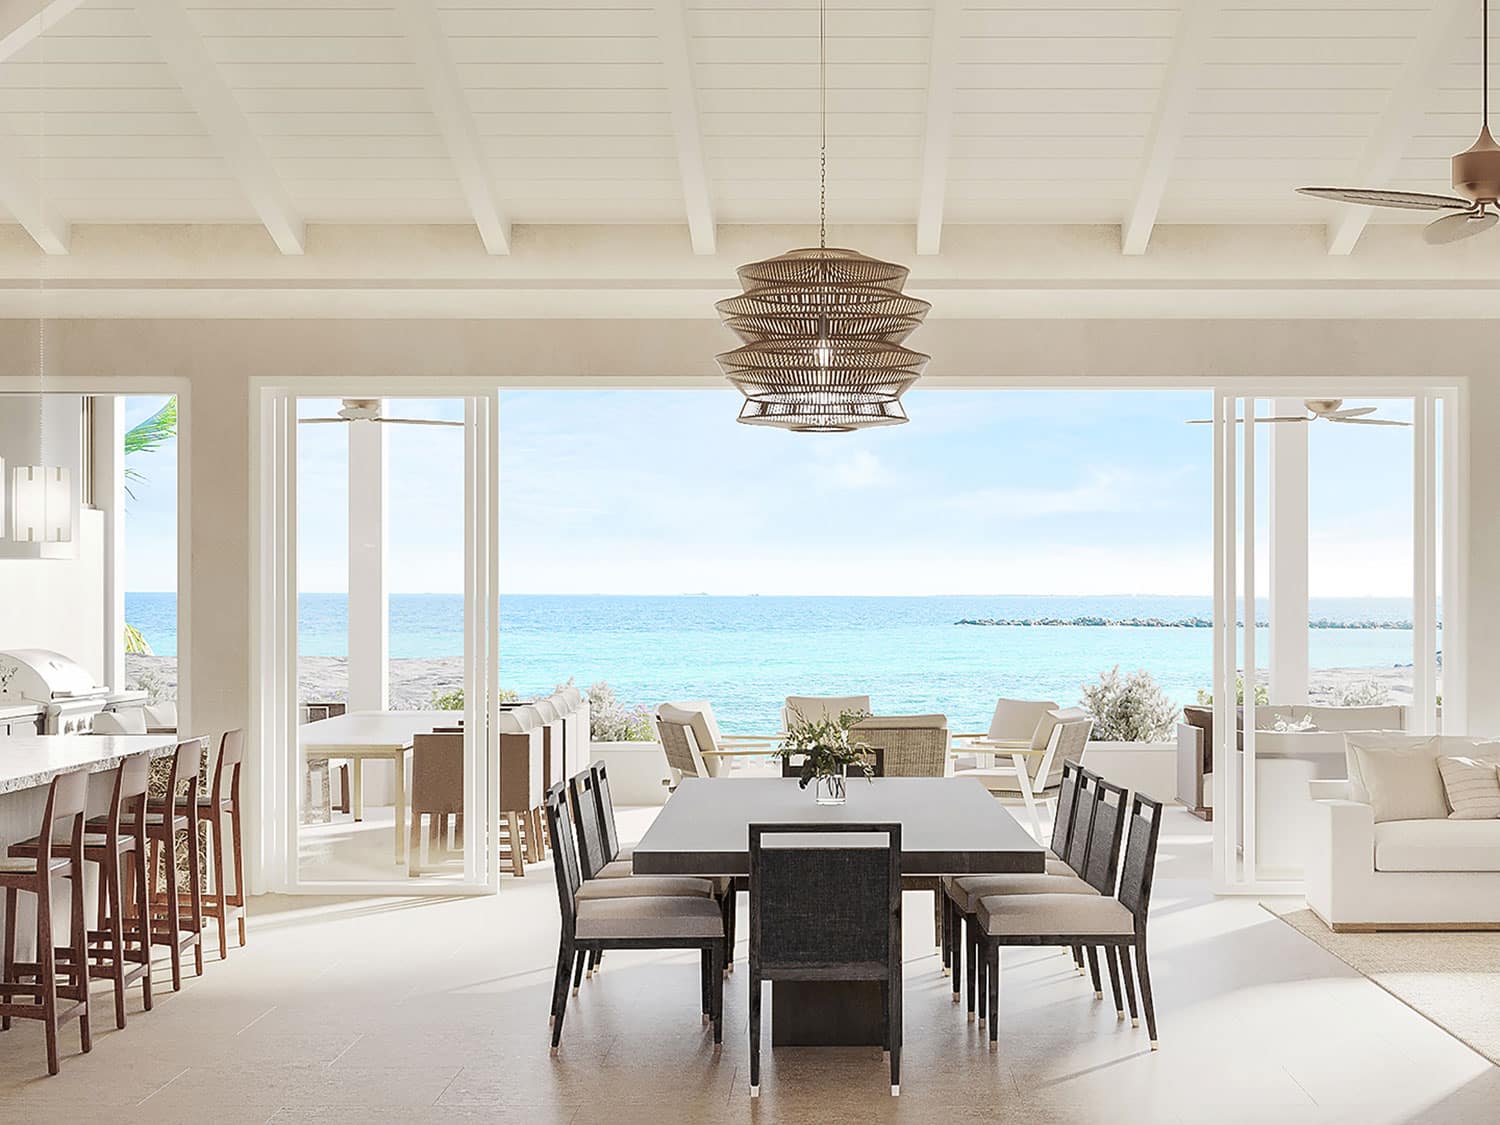 The view from the interior of Jasmine, a home in The Residences at Montage Cay, in the Abacos, Bahamas.